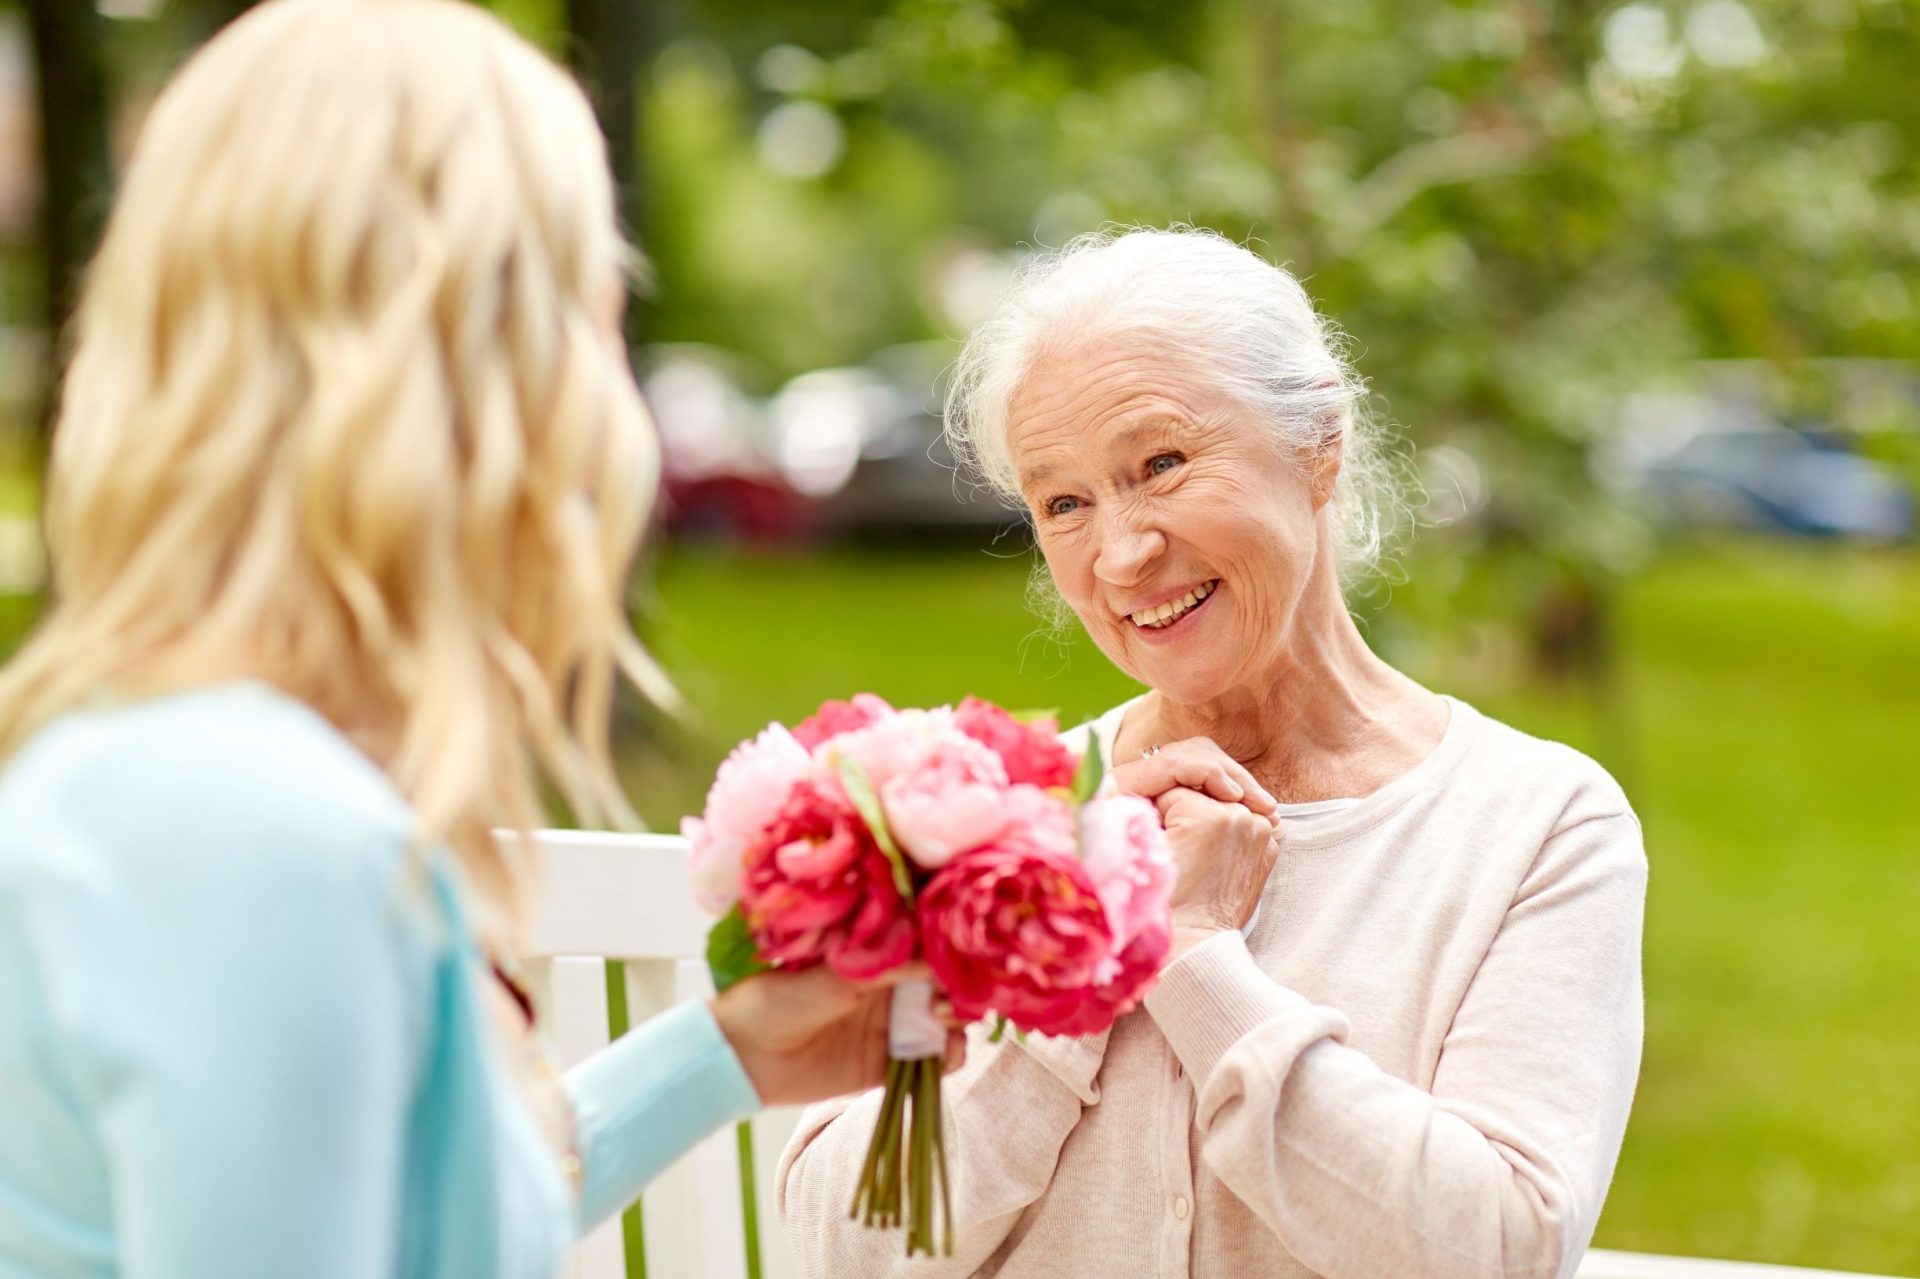 Elderly woman smiling and receiving flowers from younger woman in a park setting.